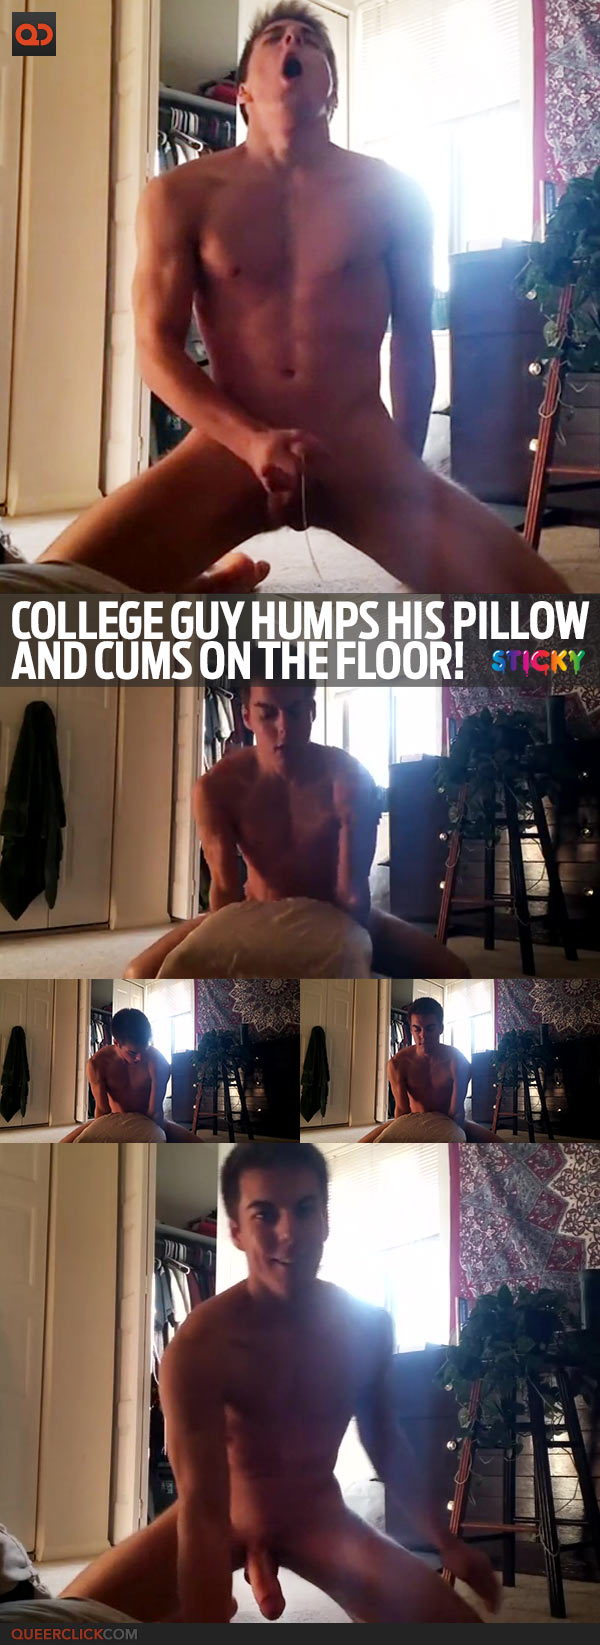 College Guy Humps His Pillow And Cums On The Floor!